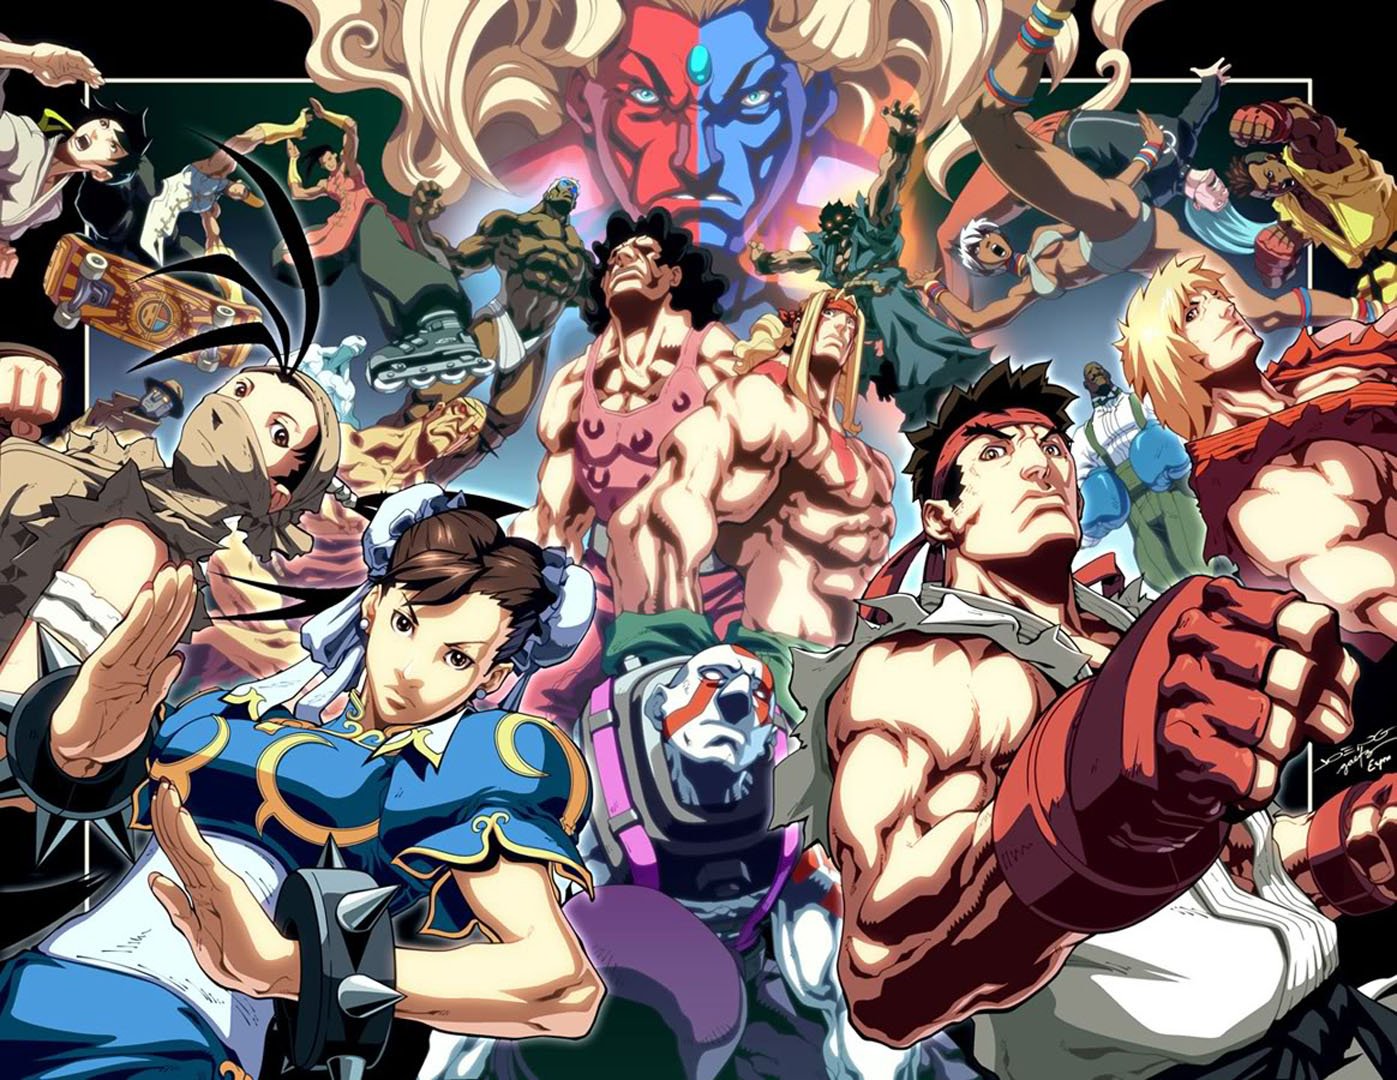  Characters   Fighting Games Wallpaper Image featuring Street Fighter 3 1397x1080